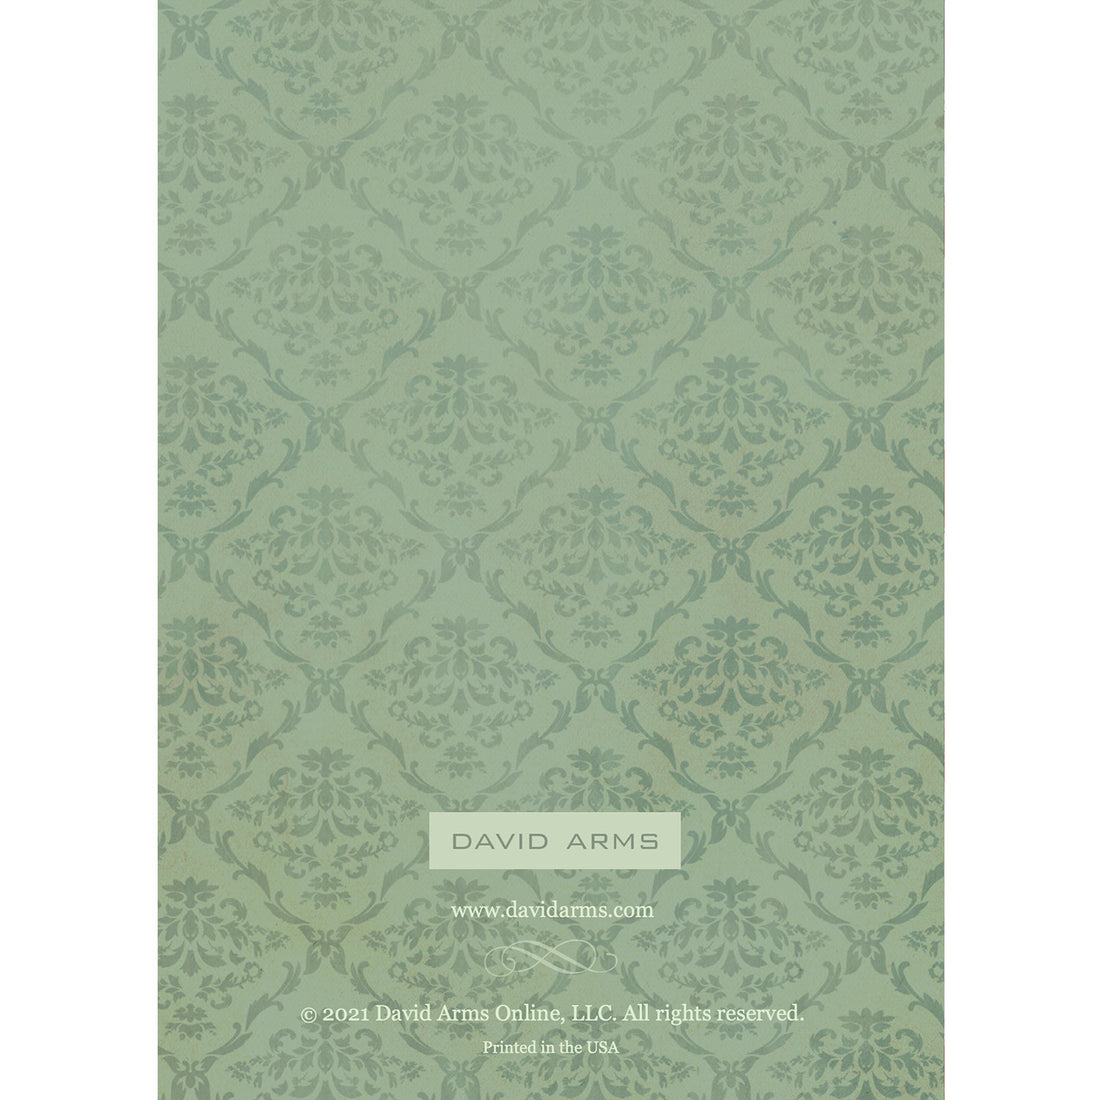 The cover of a notebook with a green damask pattern designed by David Arms can be replaced with the product name &quot;Hope (Rosemary) Card&quot; by the brand name Hester &amp; Cook.